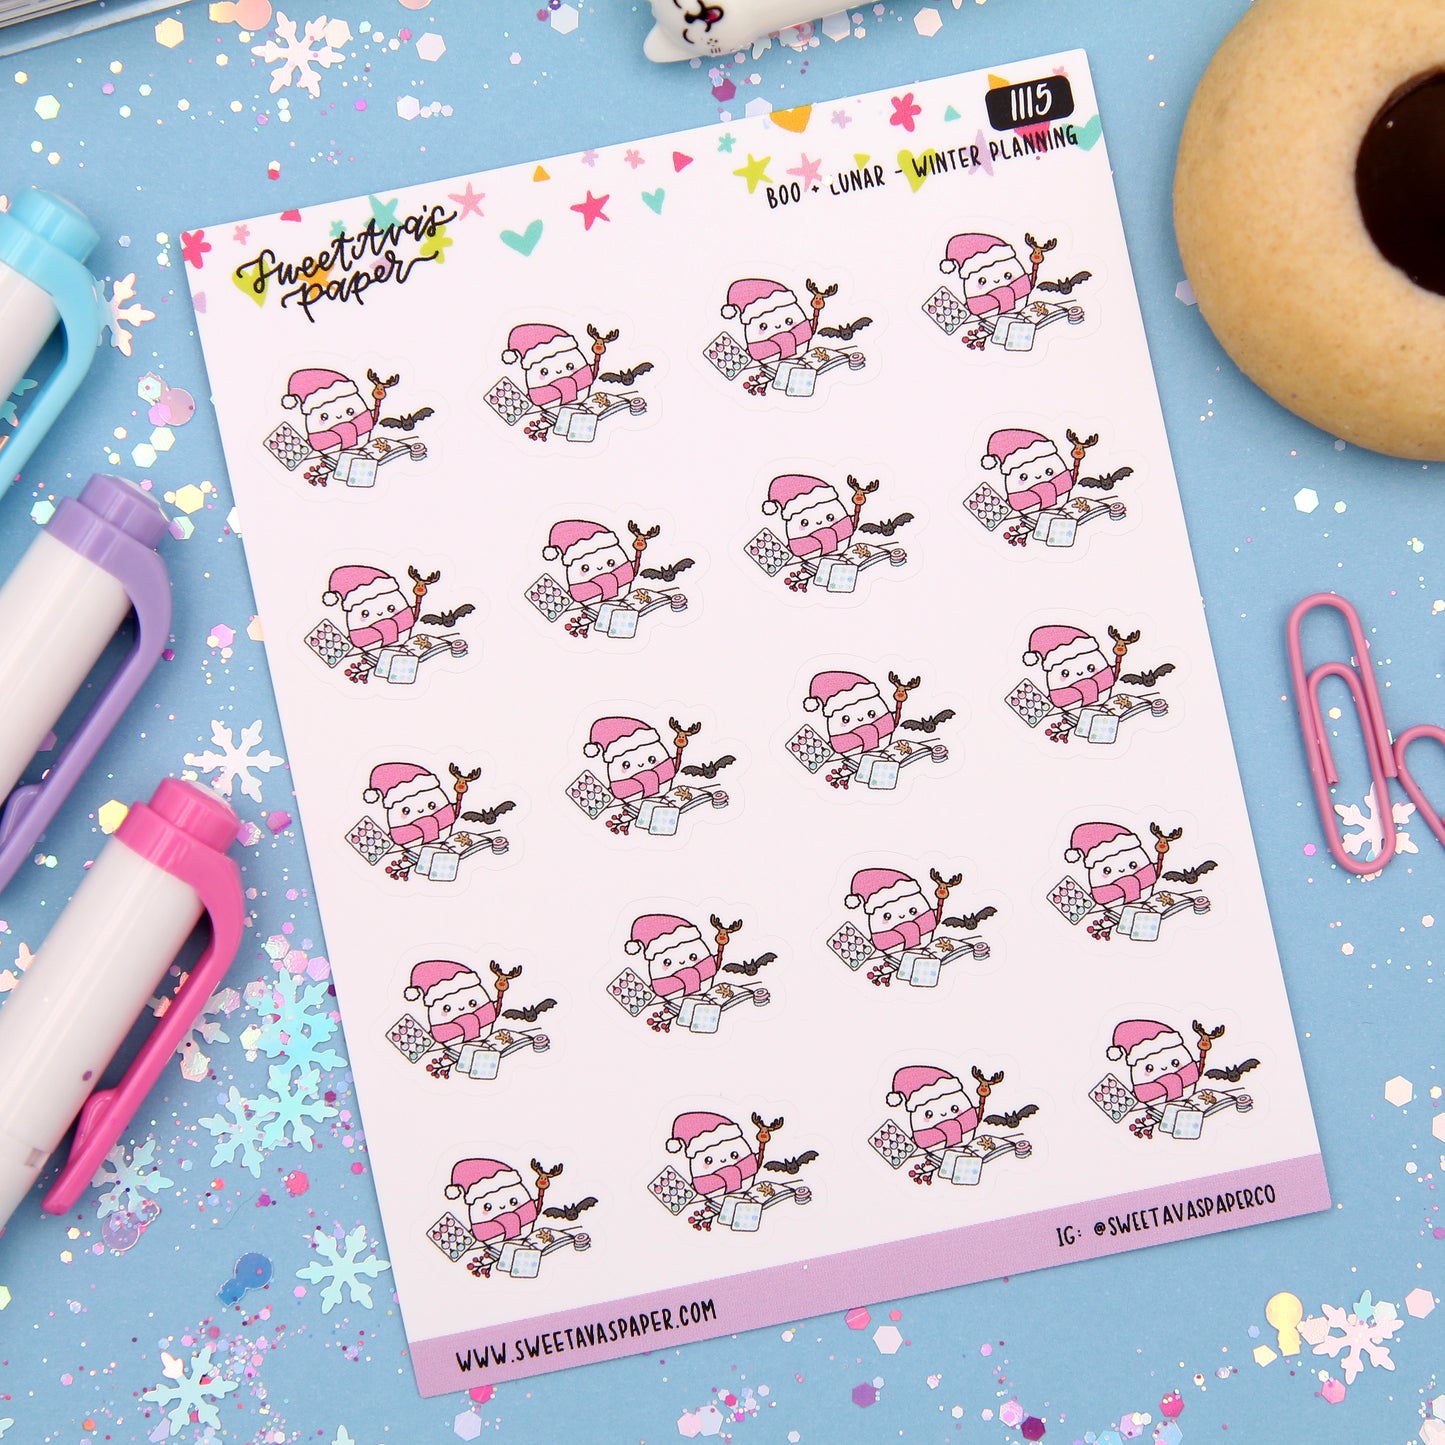 Winter Planning Planner Stickers - Boo and Lunar - [1115]